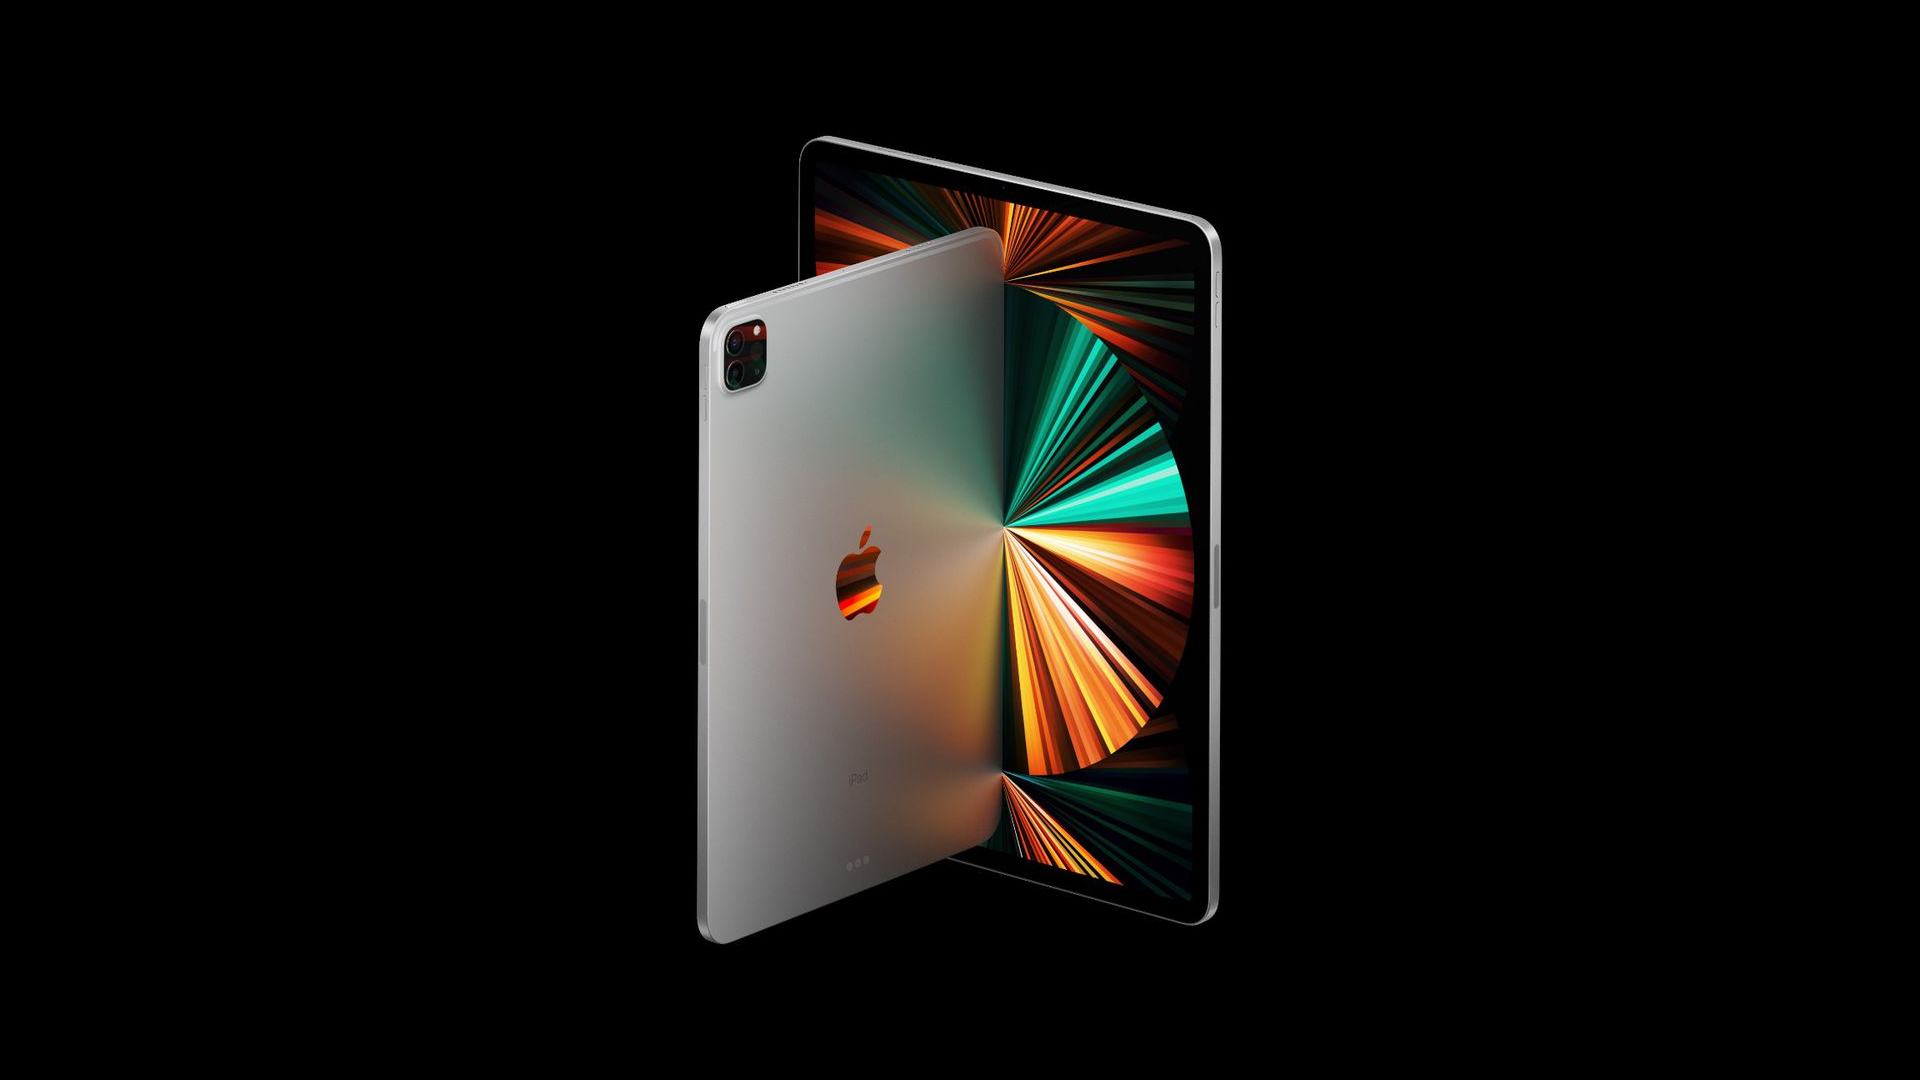 OLED 12.9-inch iPad coming in late 2023 or early 2024